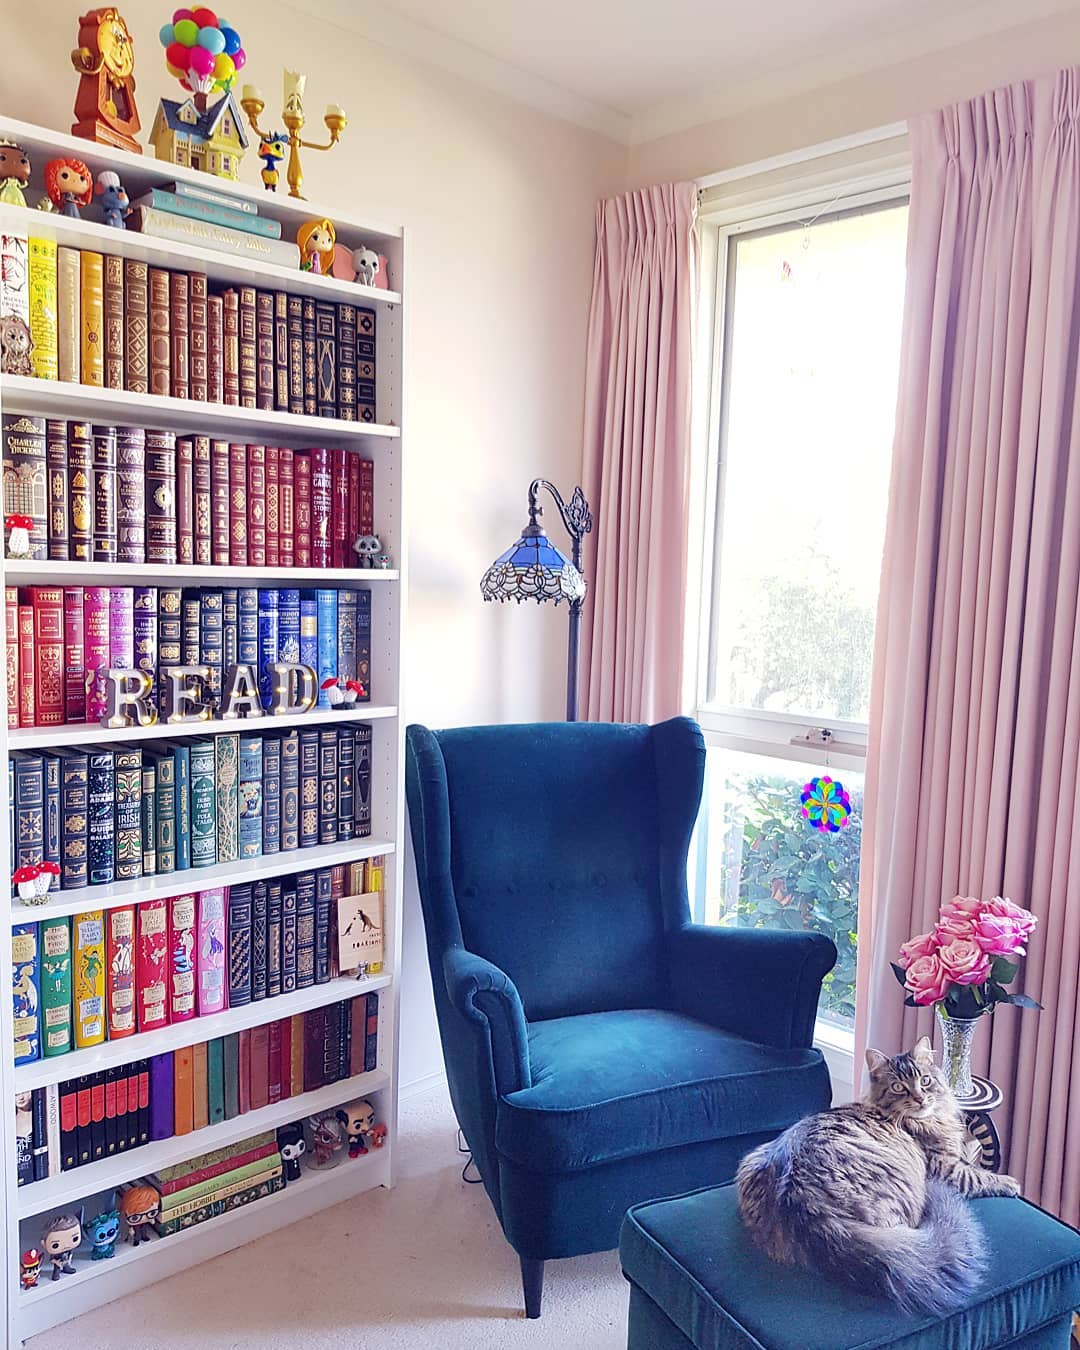 Reading Area with a Blue Chair and a Tall Bookcase Organized by Color. Photo by Instagram user @enchanted_bookshelf